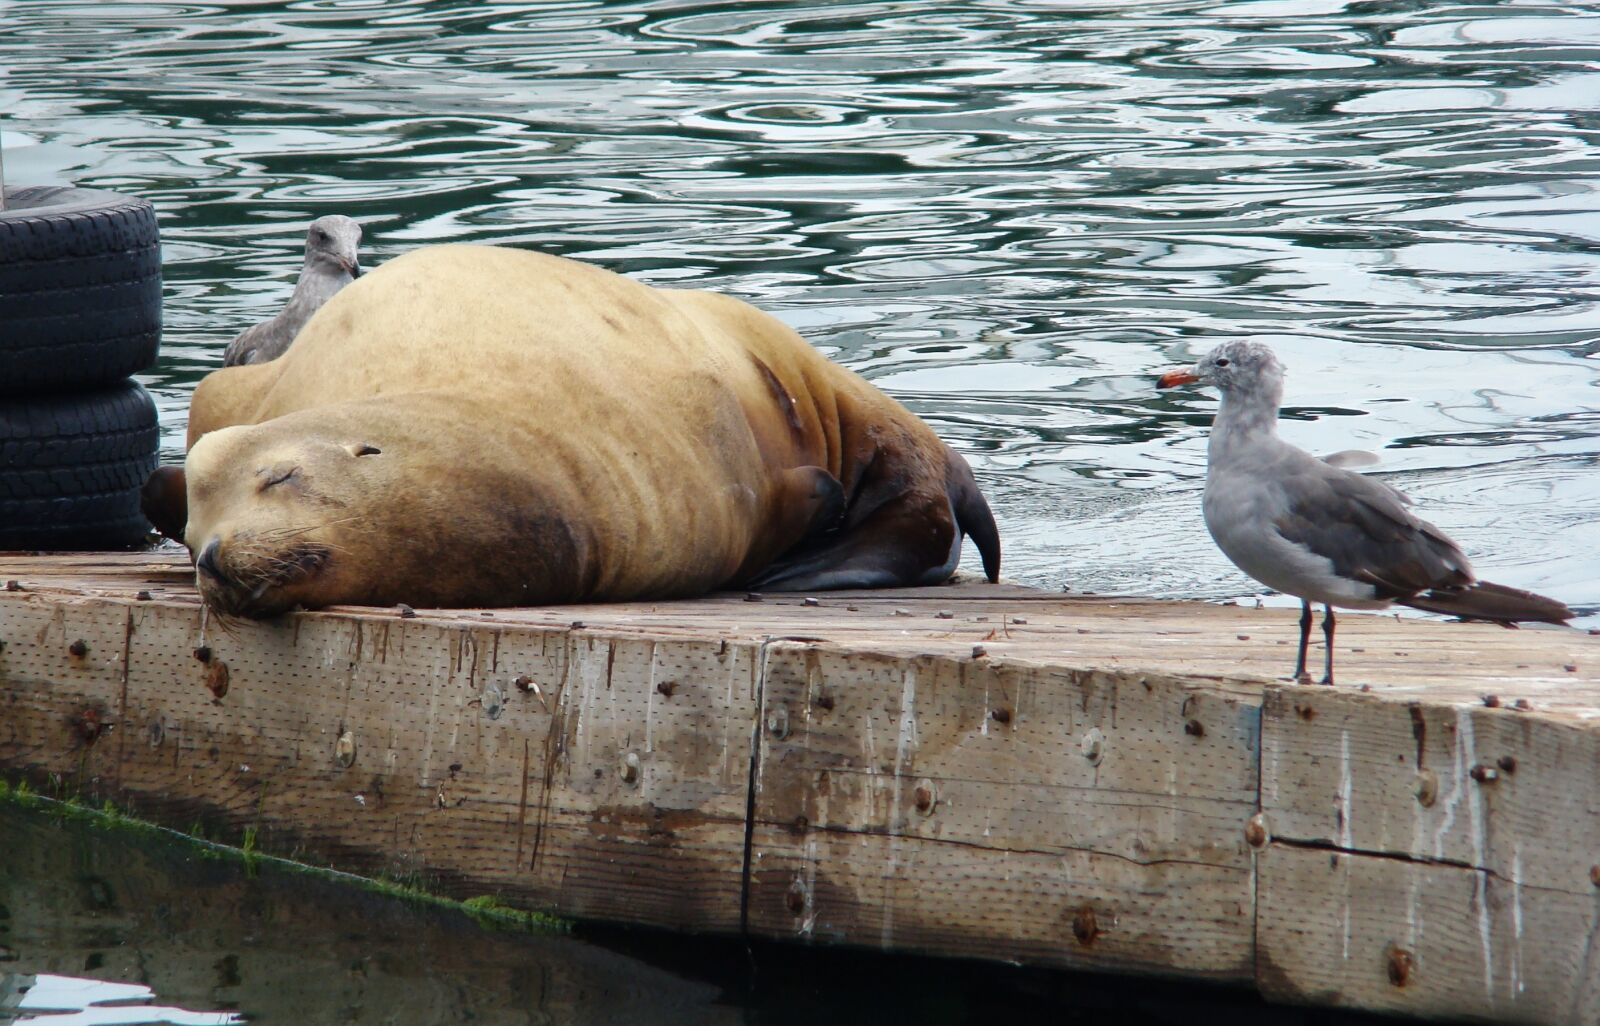 Sony DSC-H7 sample photo. Seal and seagull, ocean photography